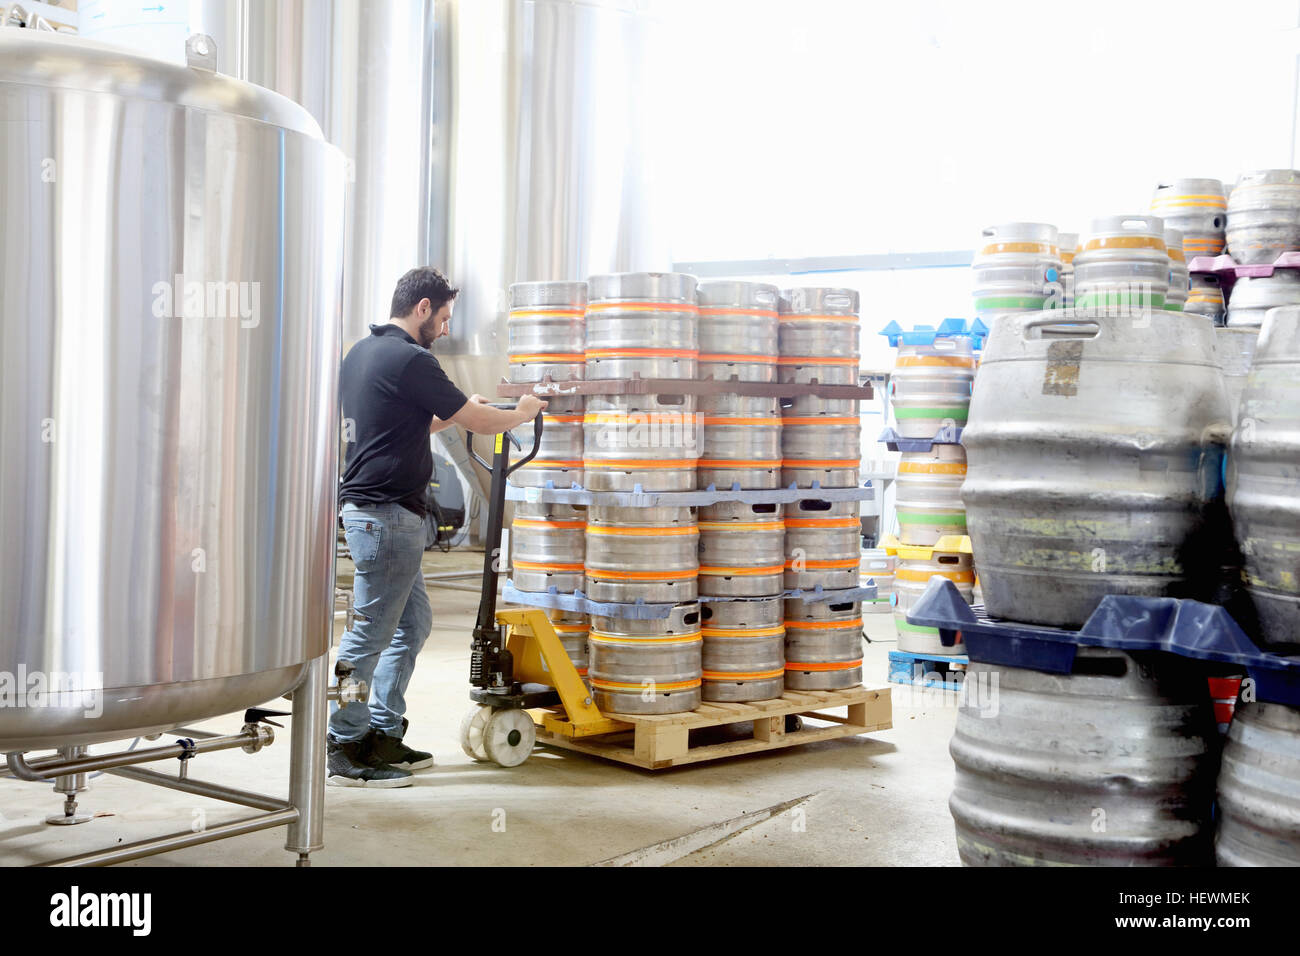 Worker in brewery organising beer barrels for delivery Stock Photo